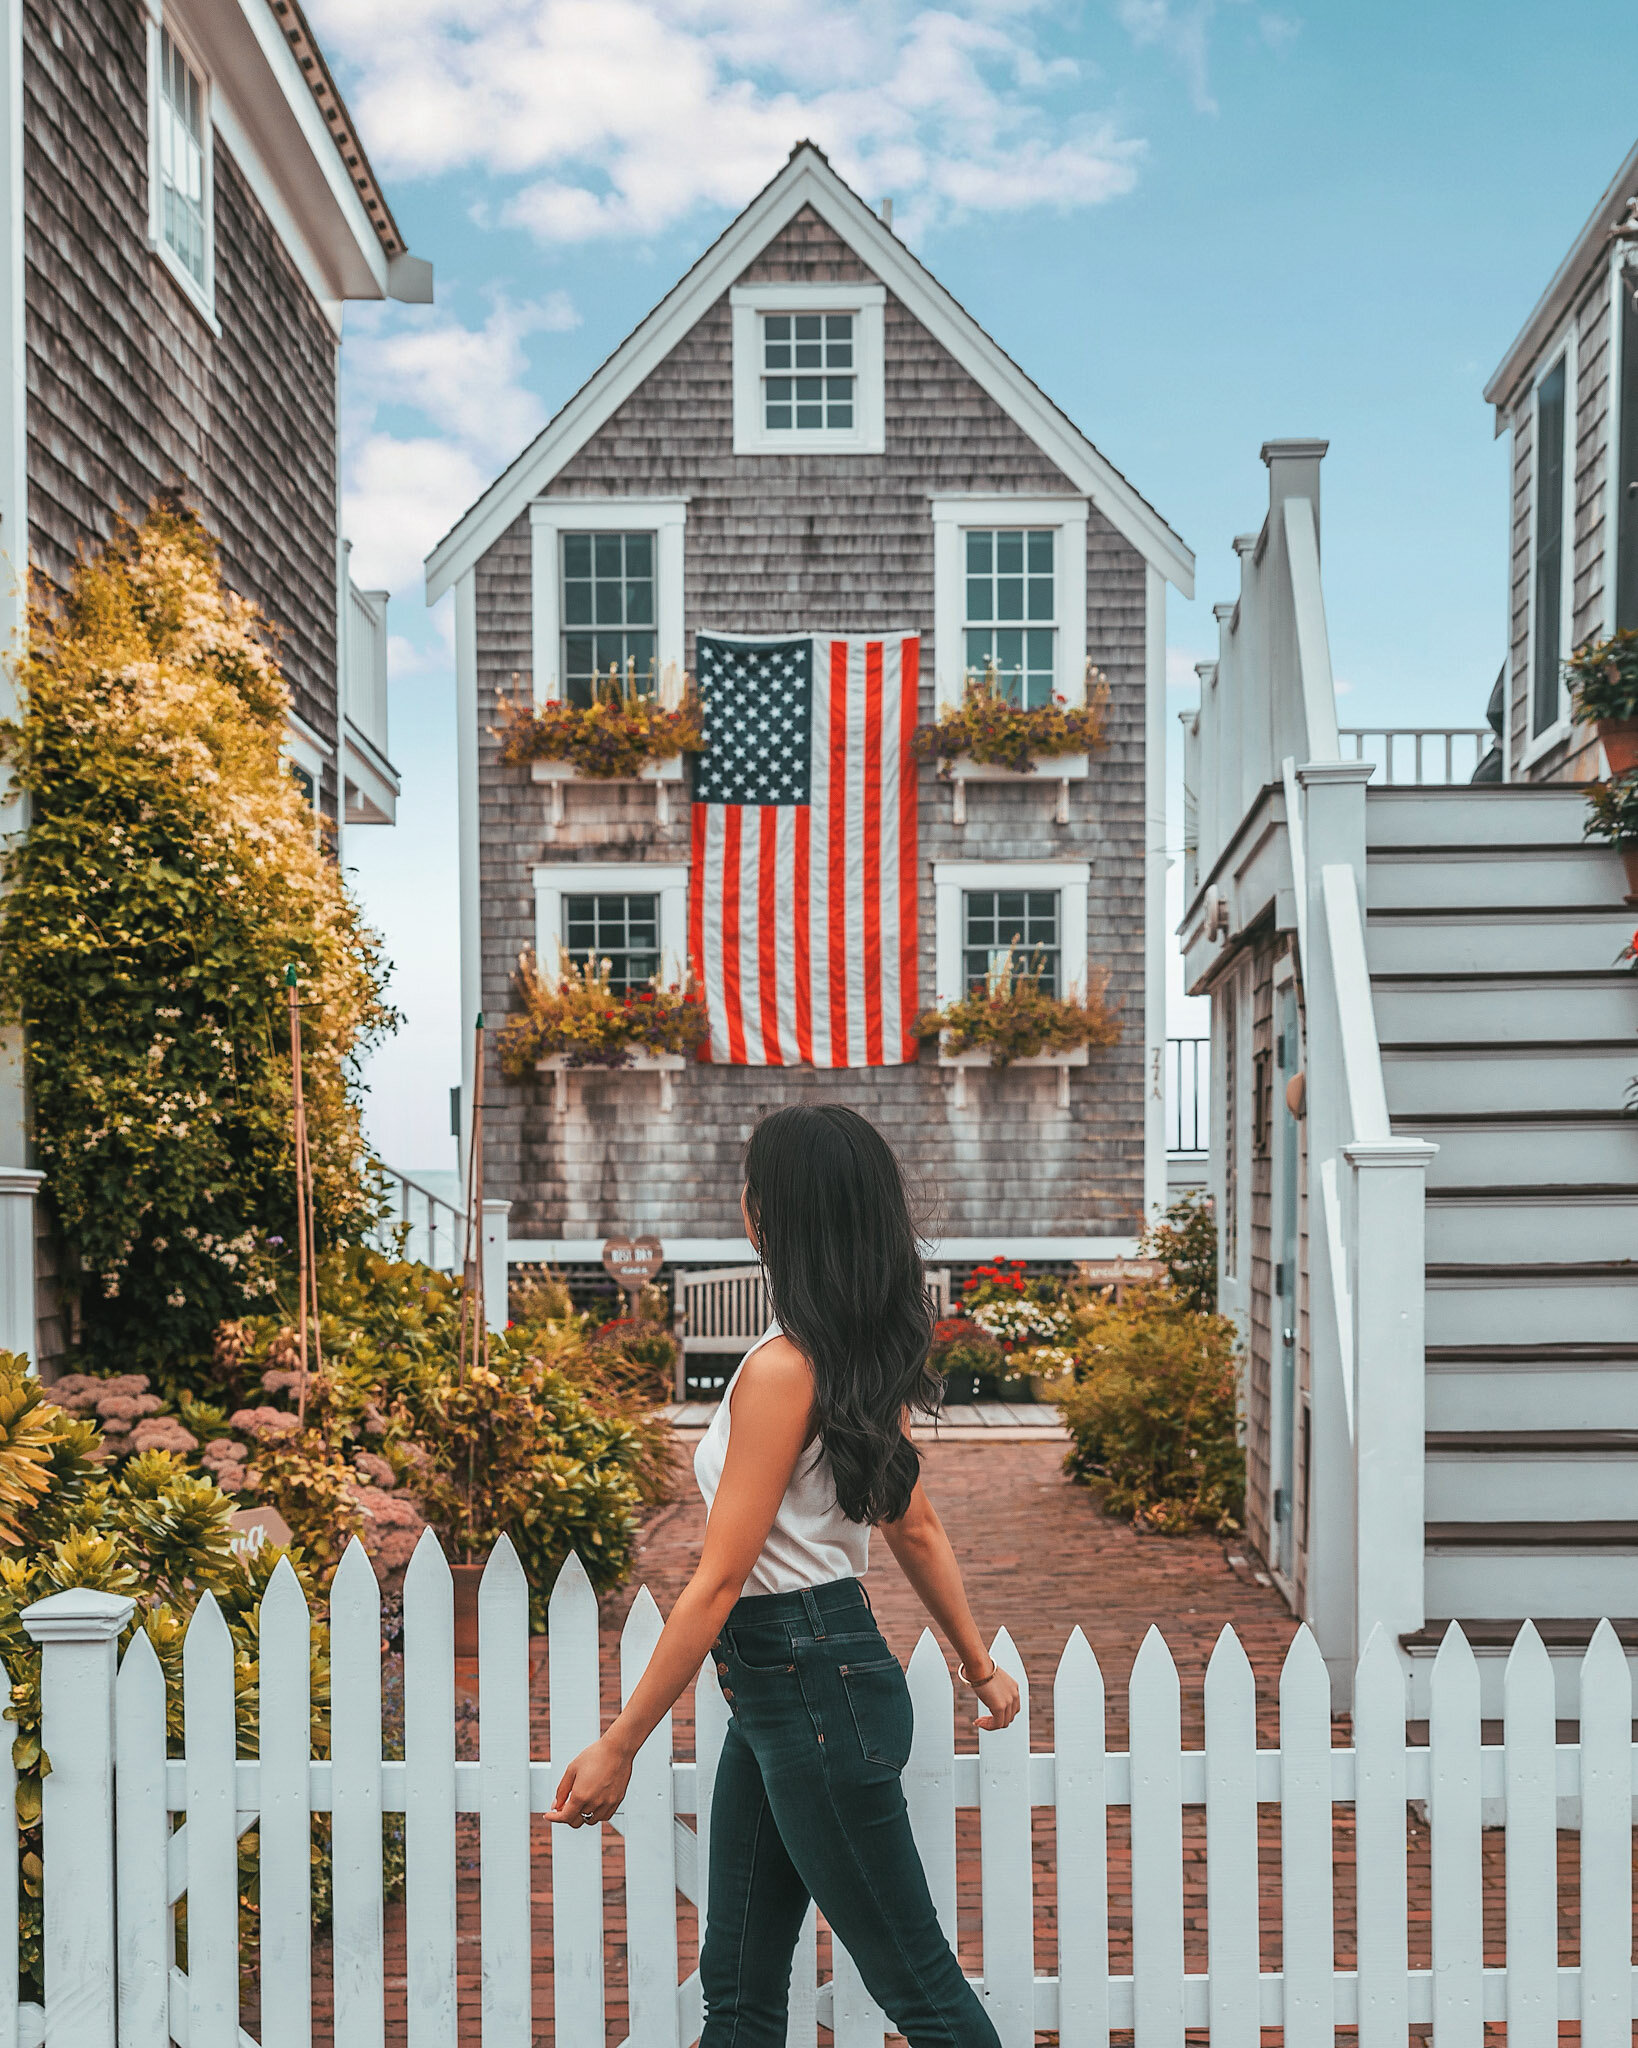 Provincetown, Massachusetts cute house // Cruise Review: 11-Day New England & Canada on the Seabourn Quest // #readysetjetset #cruise #luxury #travel #cruising